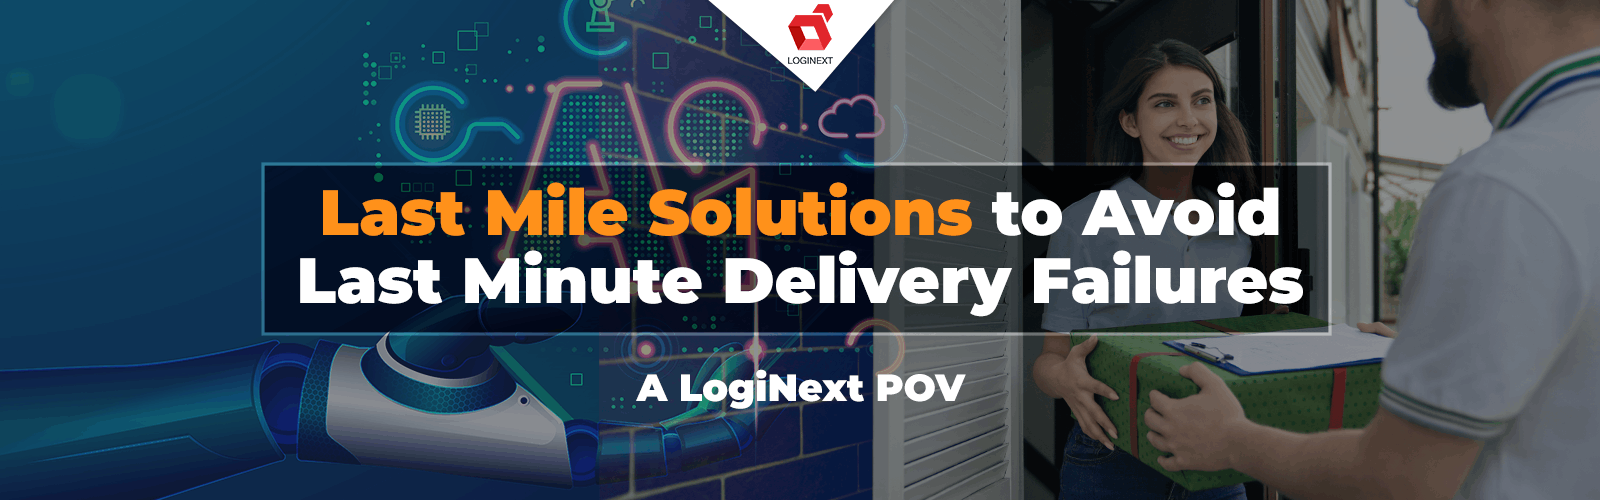 Last Mile Solutions to Avoid Last Minute Delivery Failures